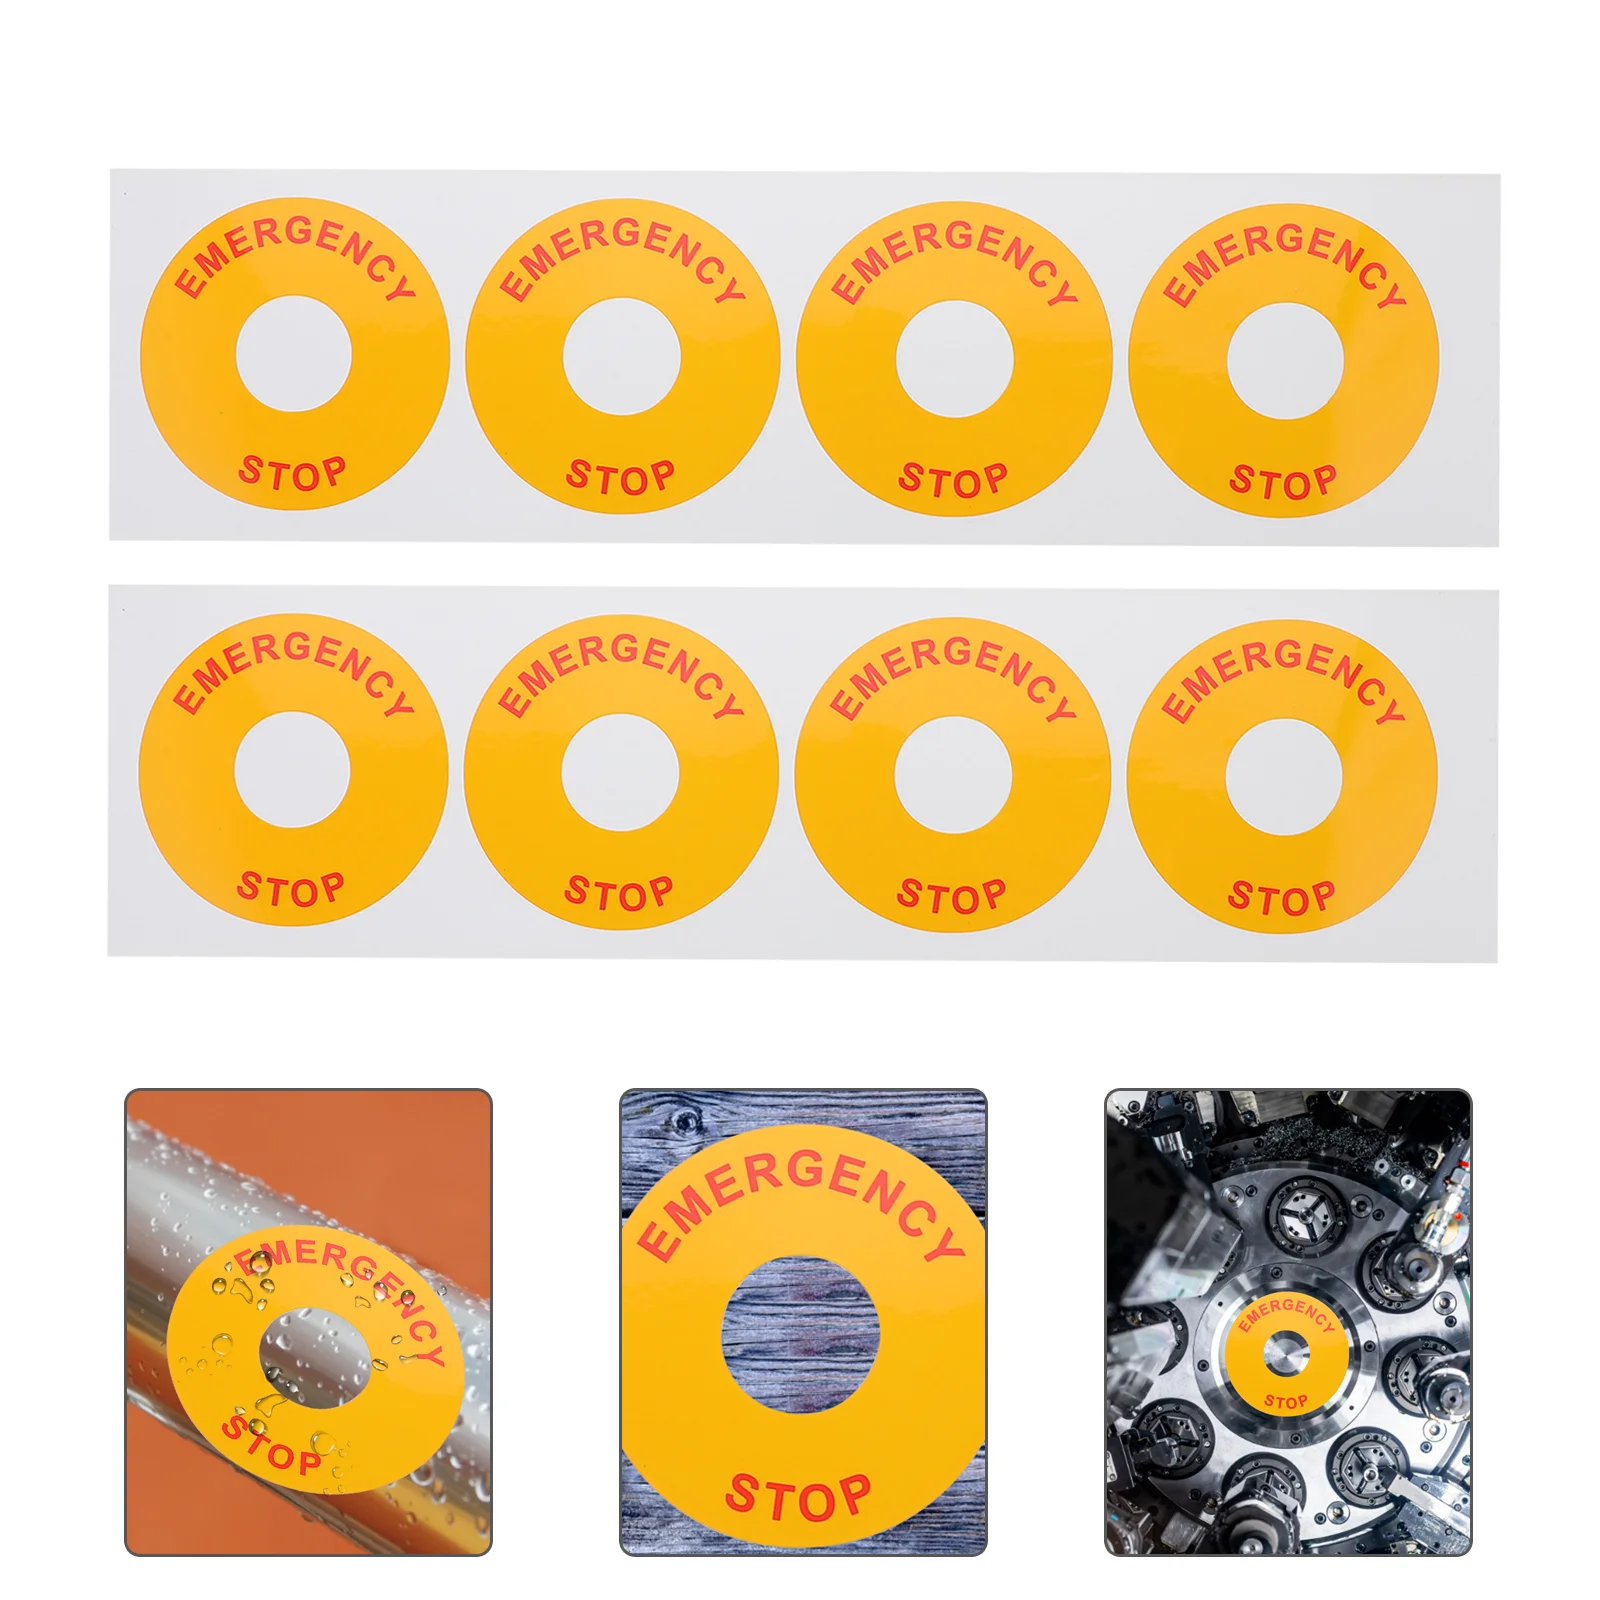 

8 Pcs Emergency Stop Warning Equipment Sign Sticker Stickers Caution Label Decal Power Switch Button